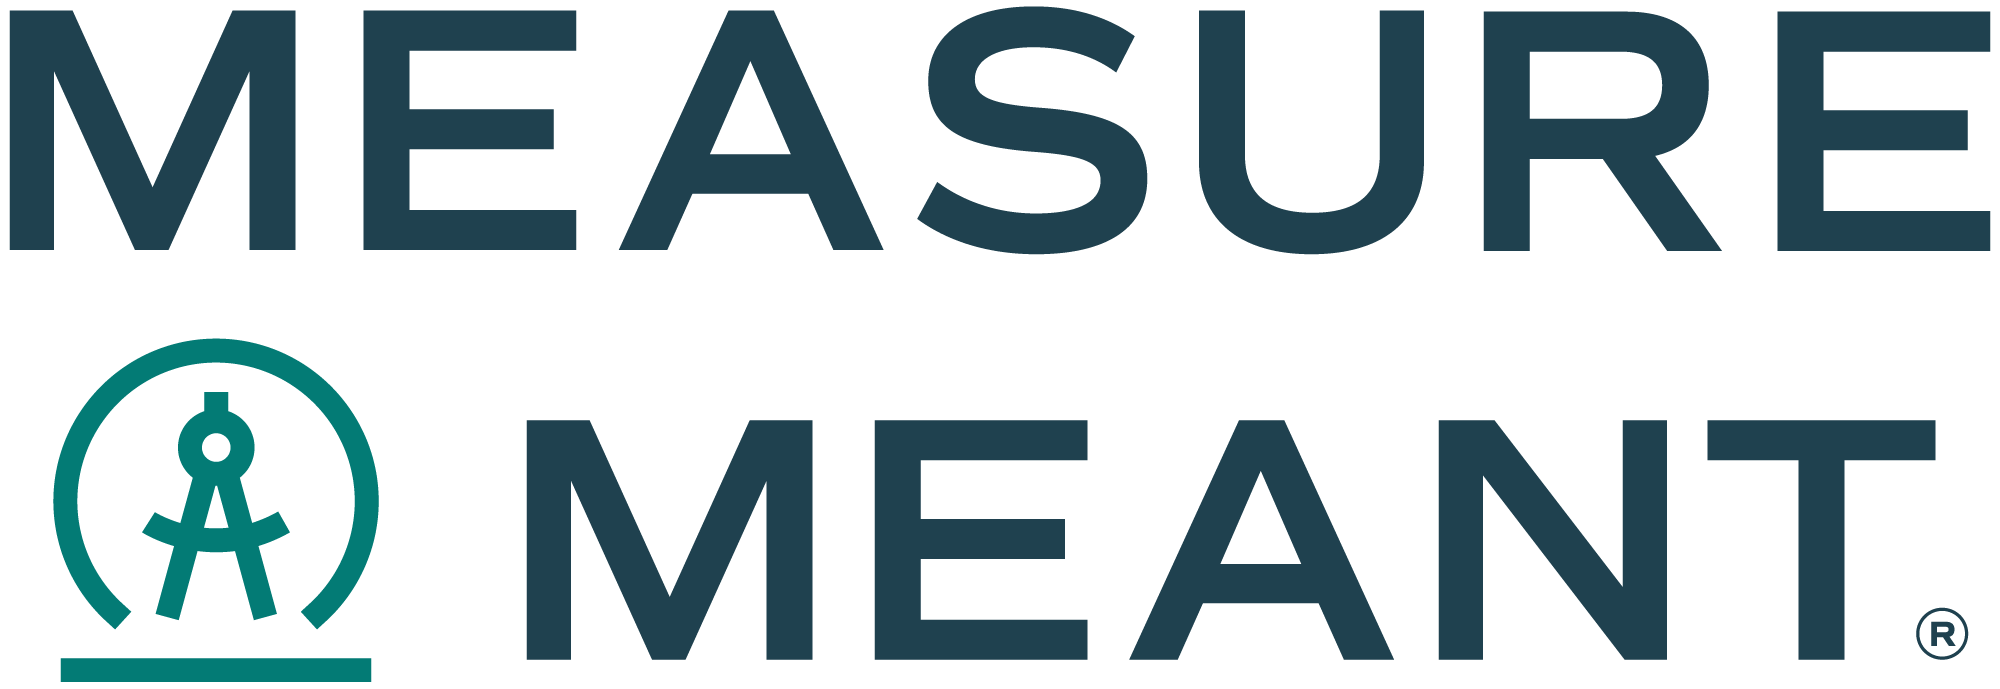 Measure Meant